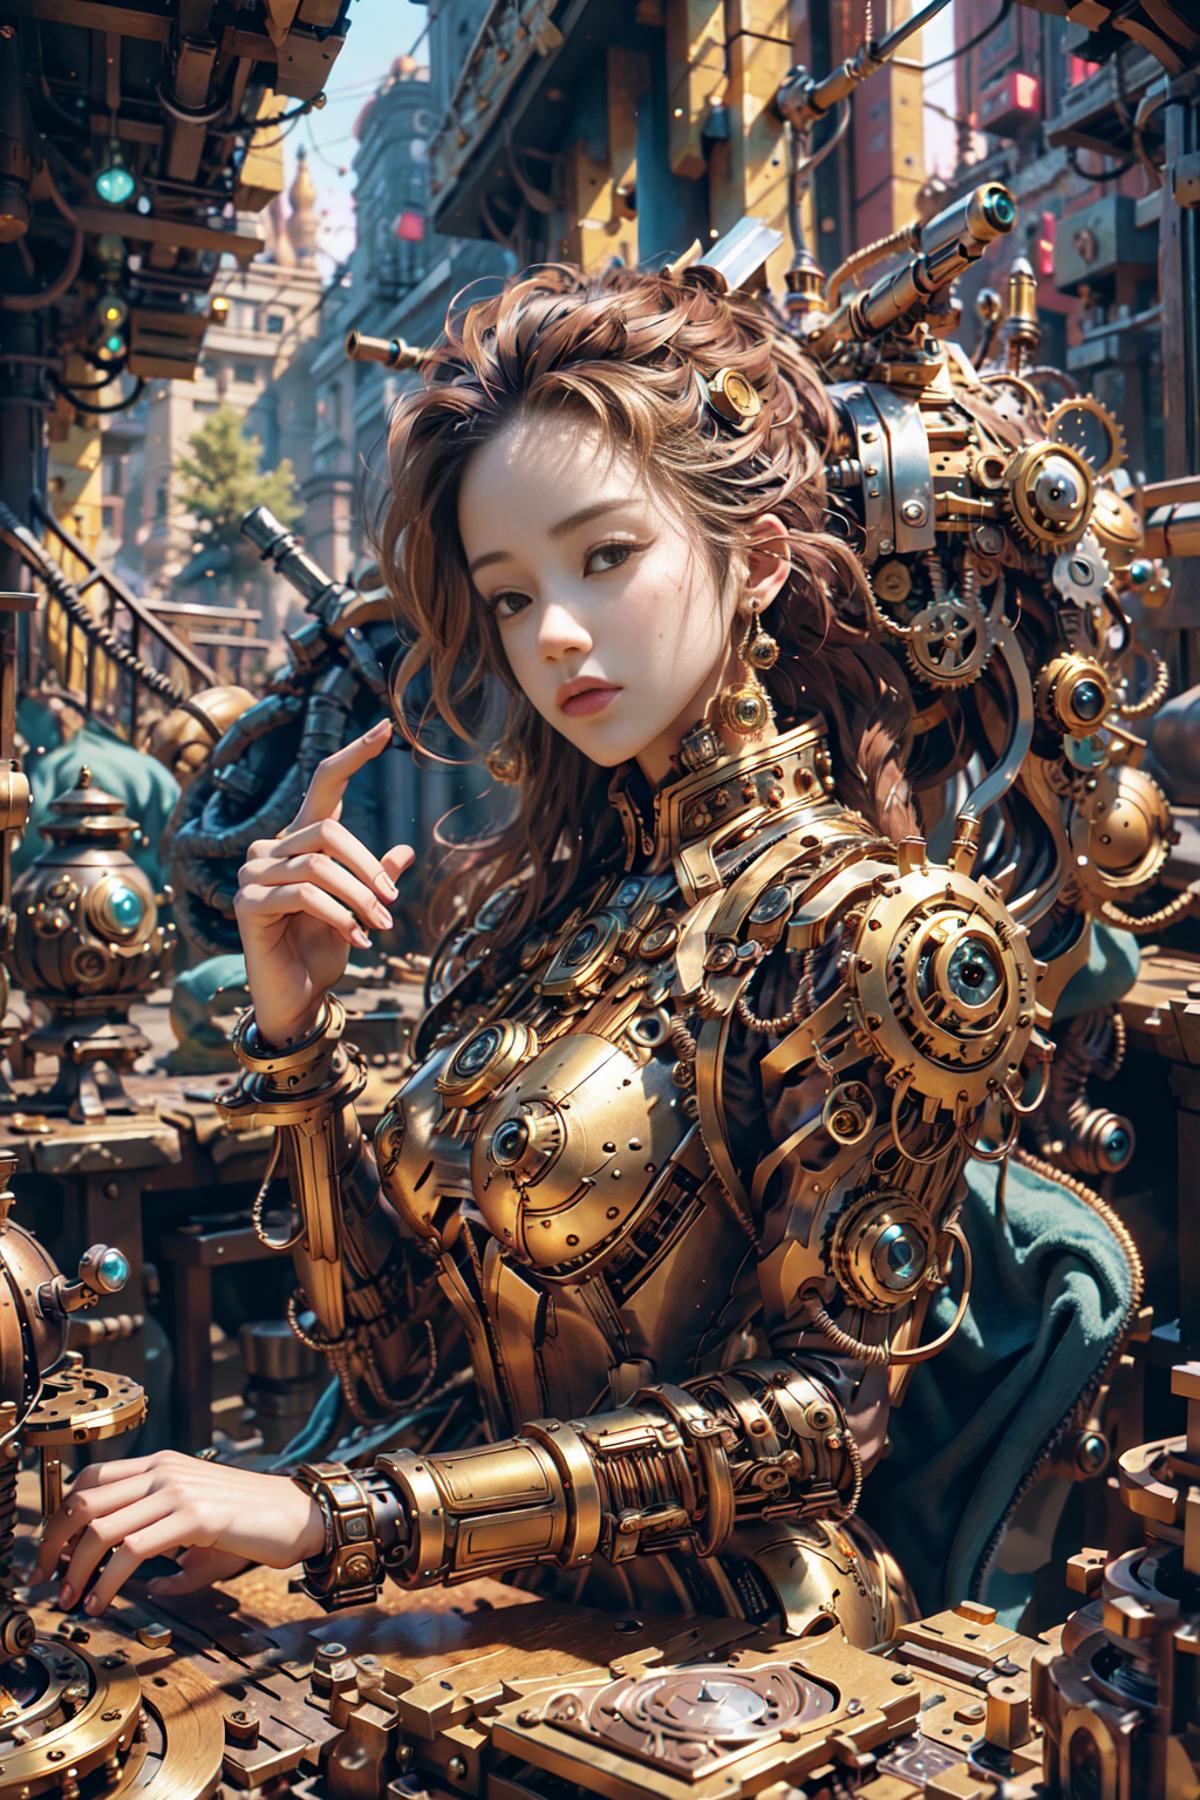 Steampunkcog image by ChaosOrchestrator